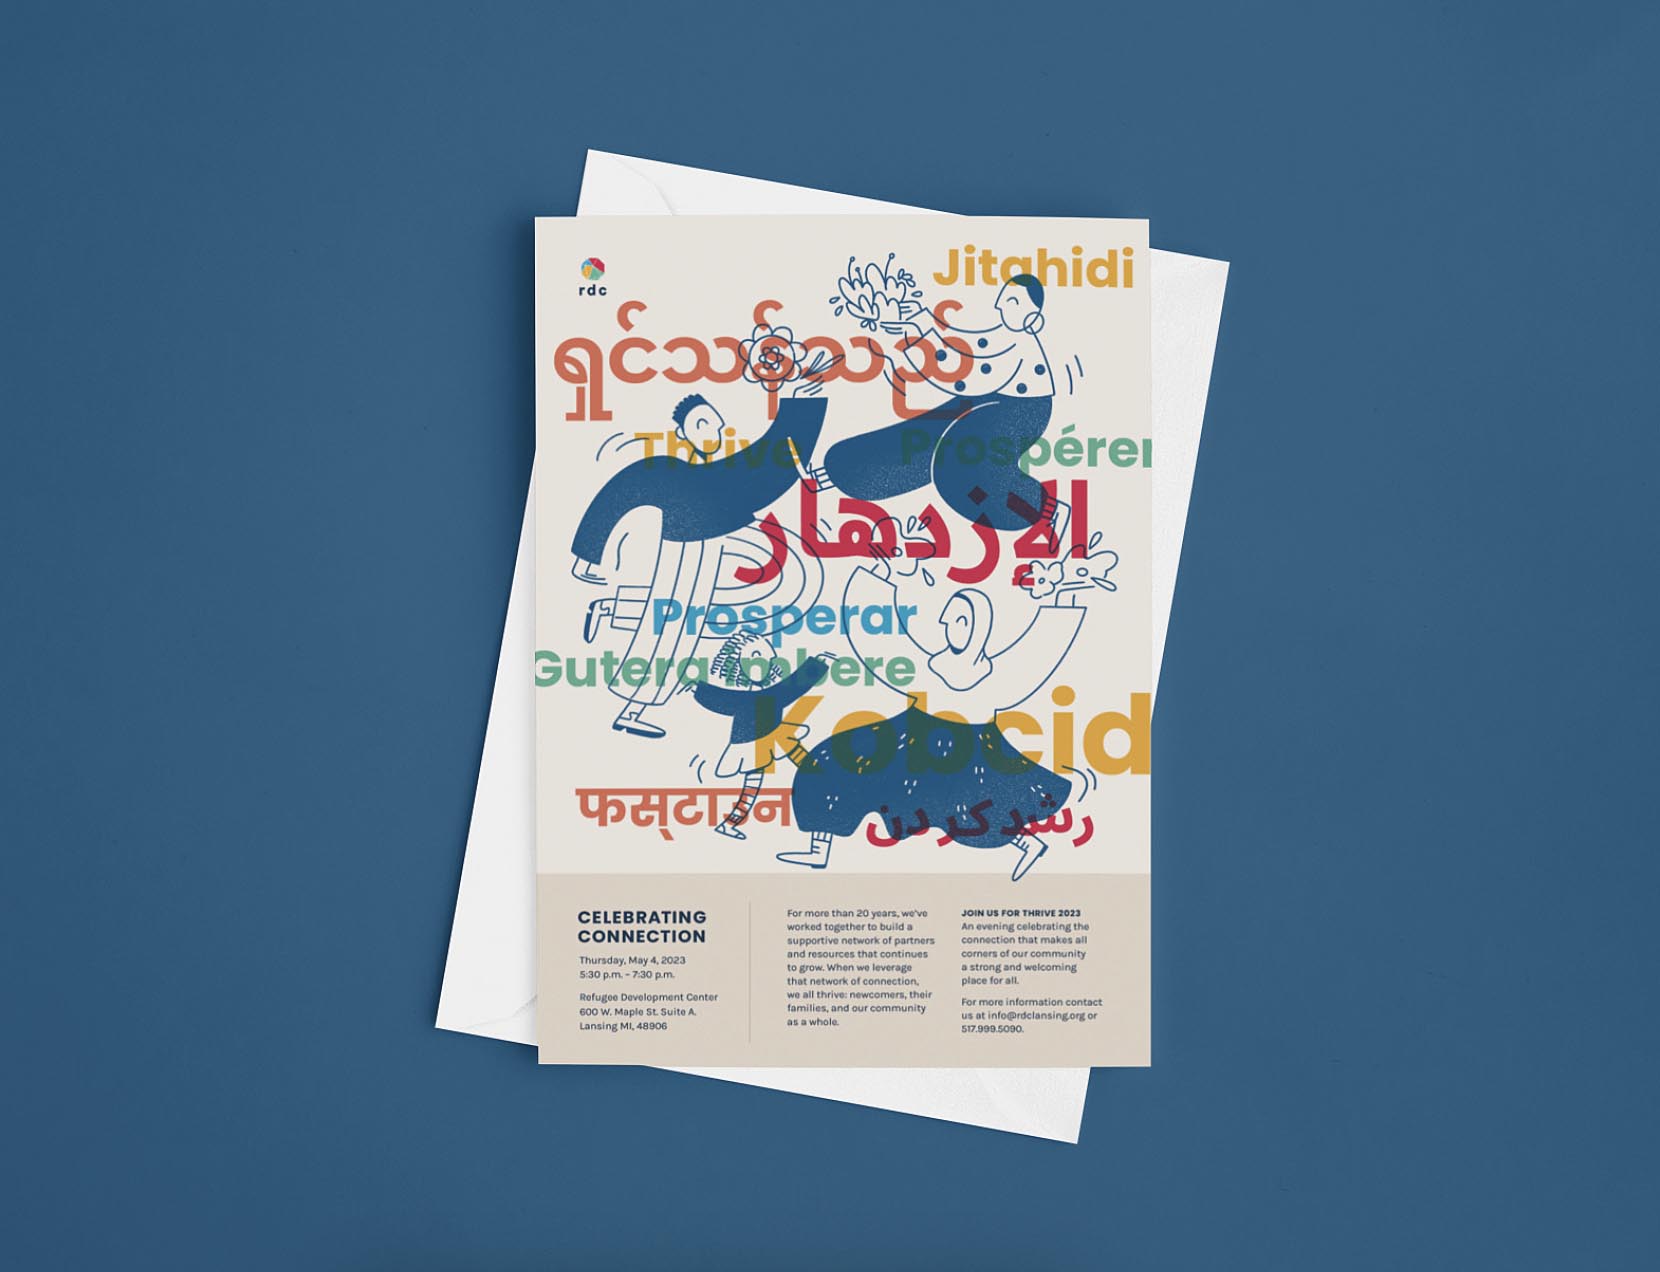 A paper invitation to an RDC event includes illustrations of people and the word "Thrive" translated into various languages in numerous typographies.